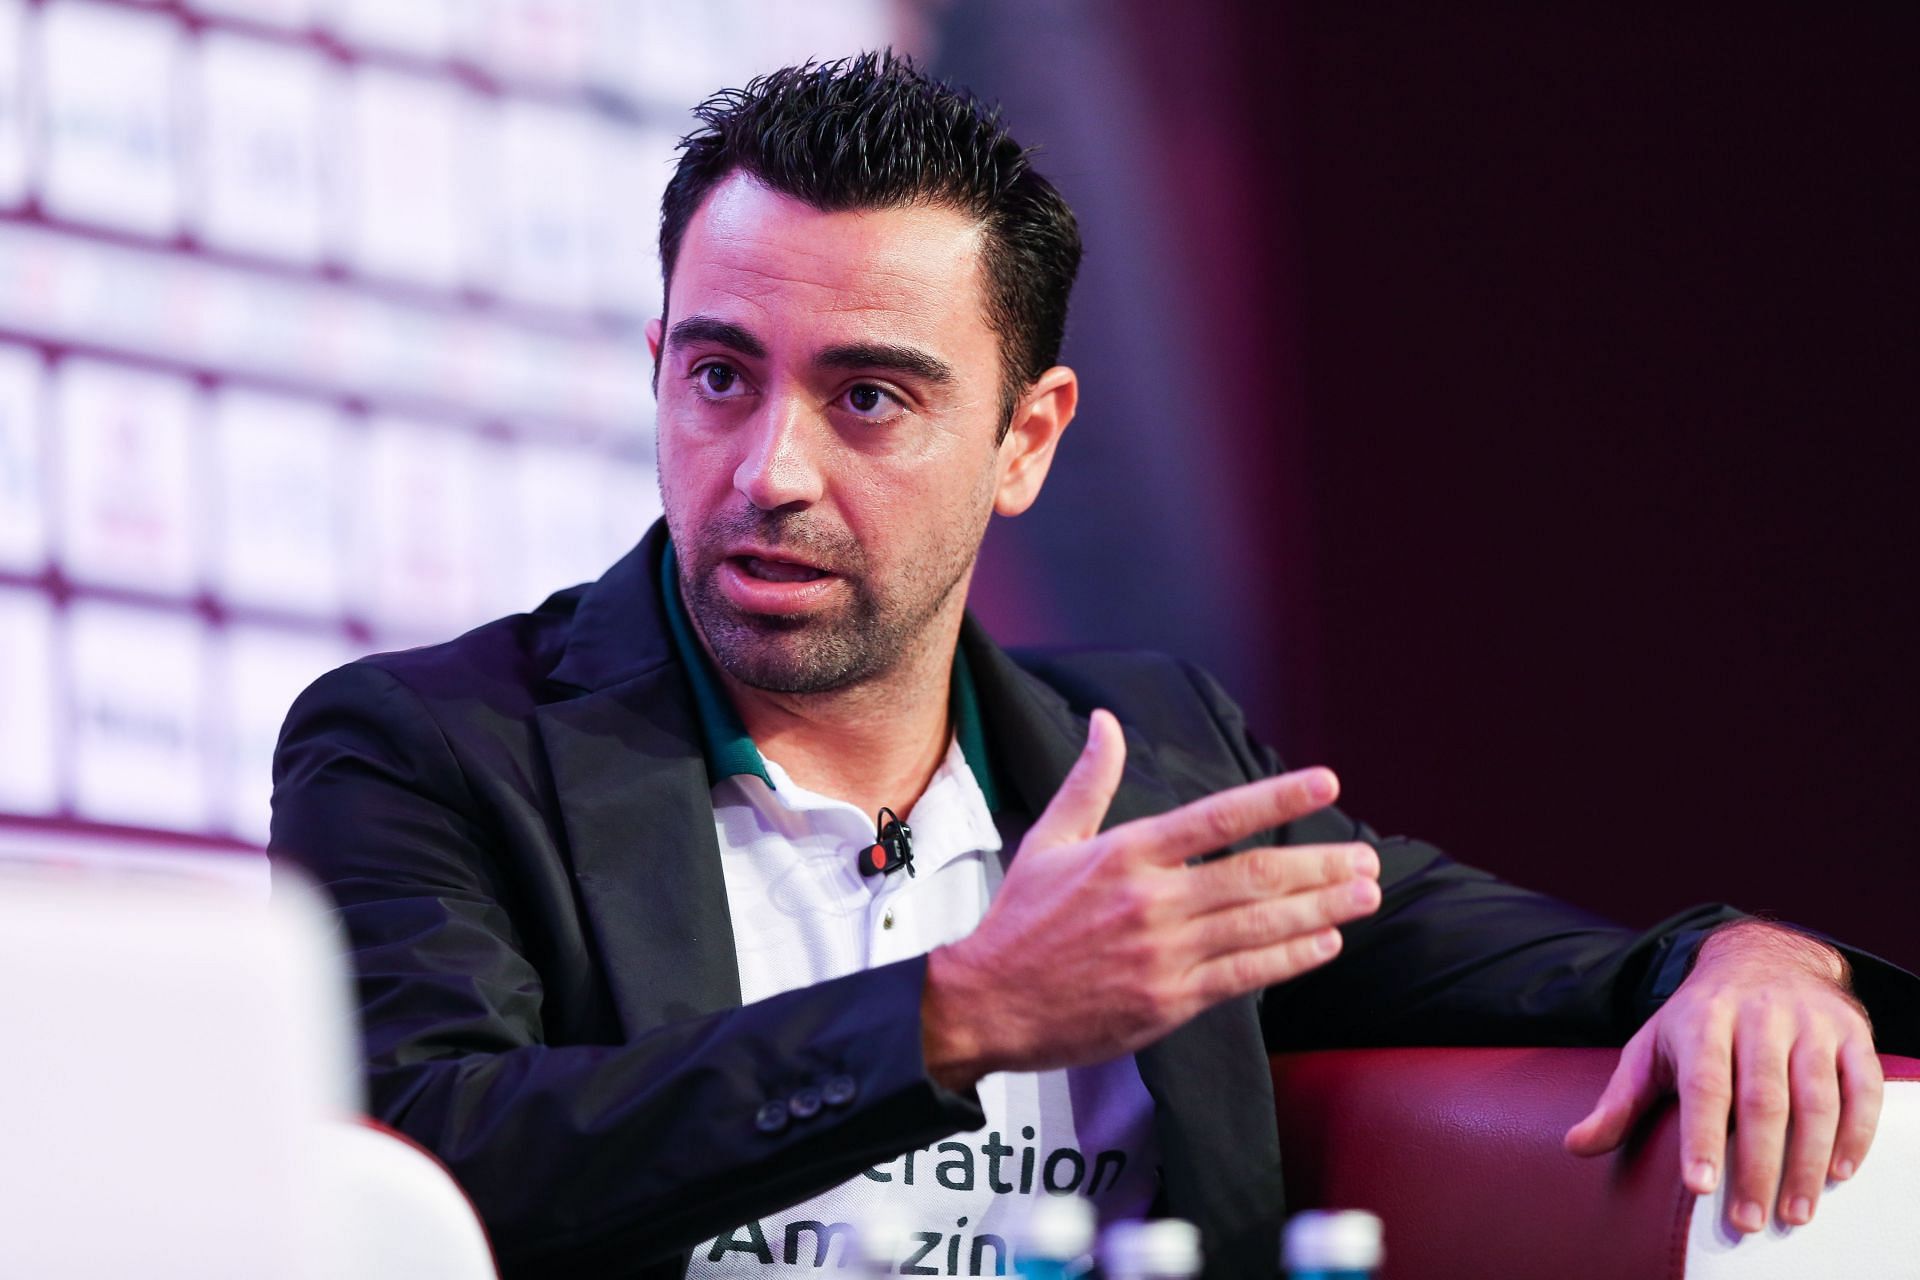 Barcelona are expected to announce Xavi as their new boss. (Photo by Barrington Coombs/Getty Images)